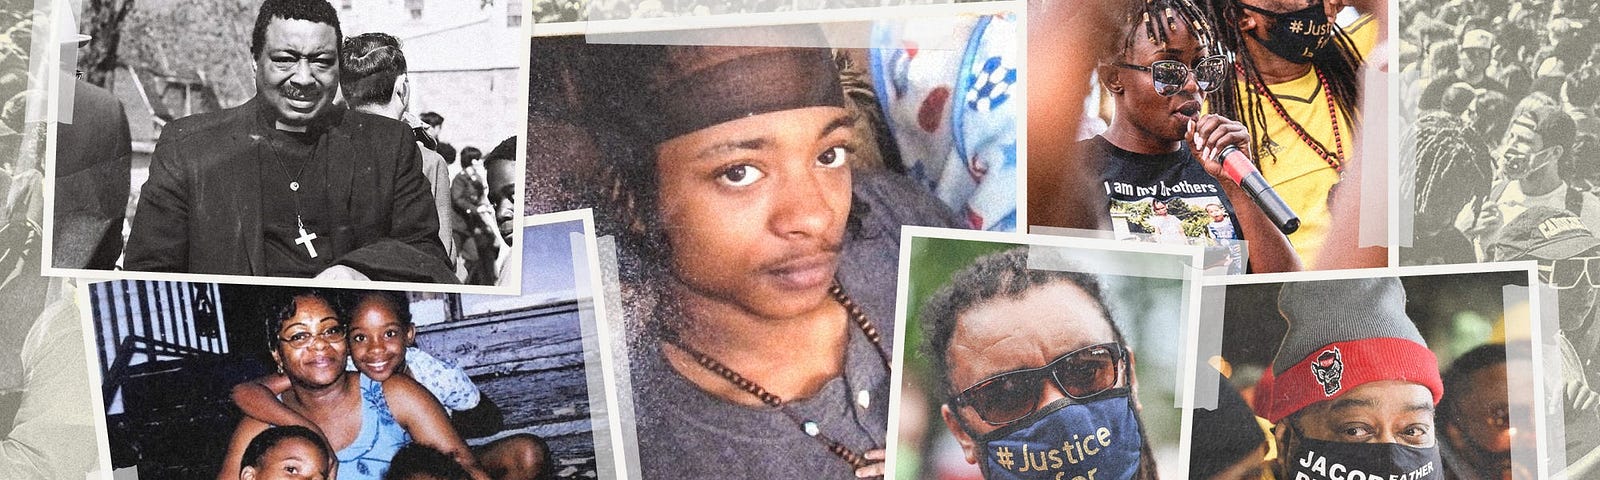 A graphic featuring photos of Jacob Blake and his family.